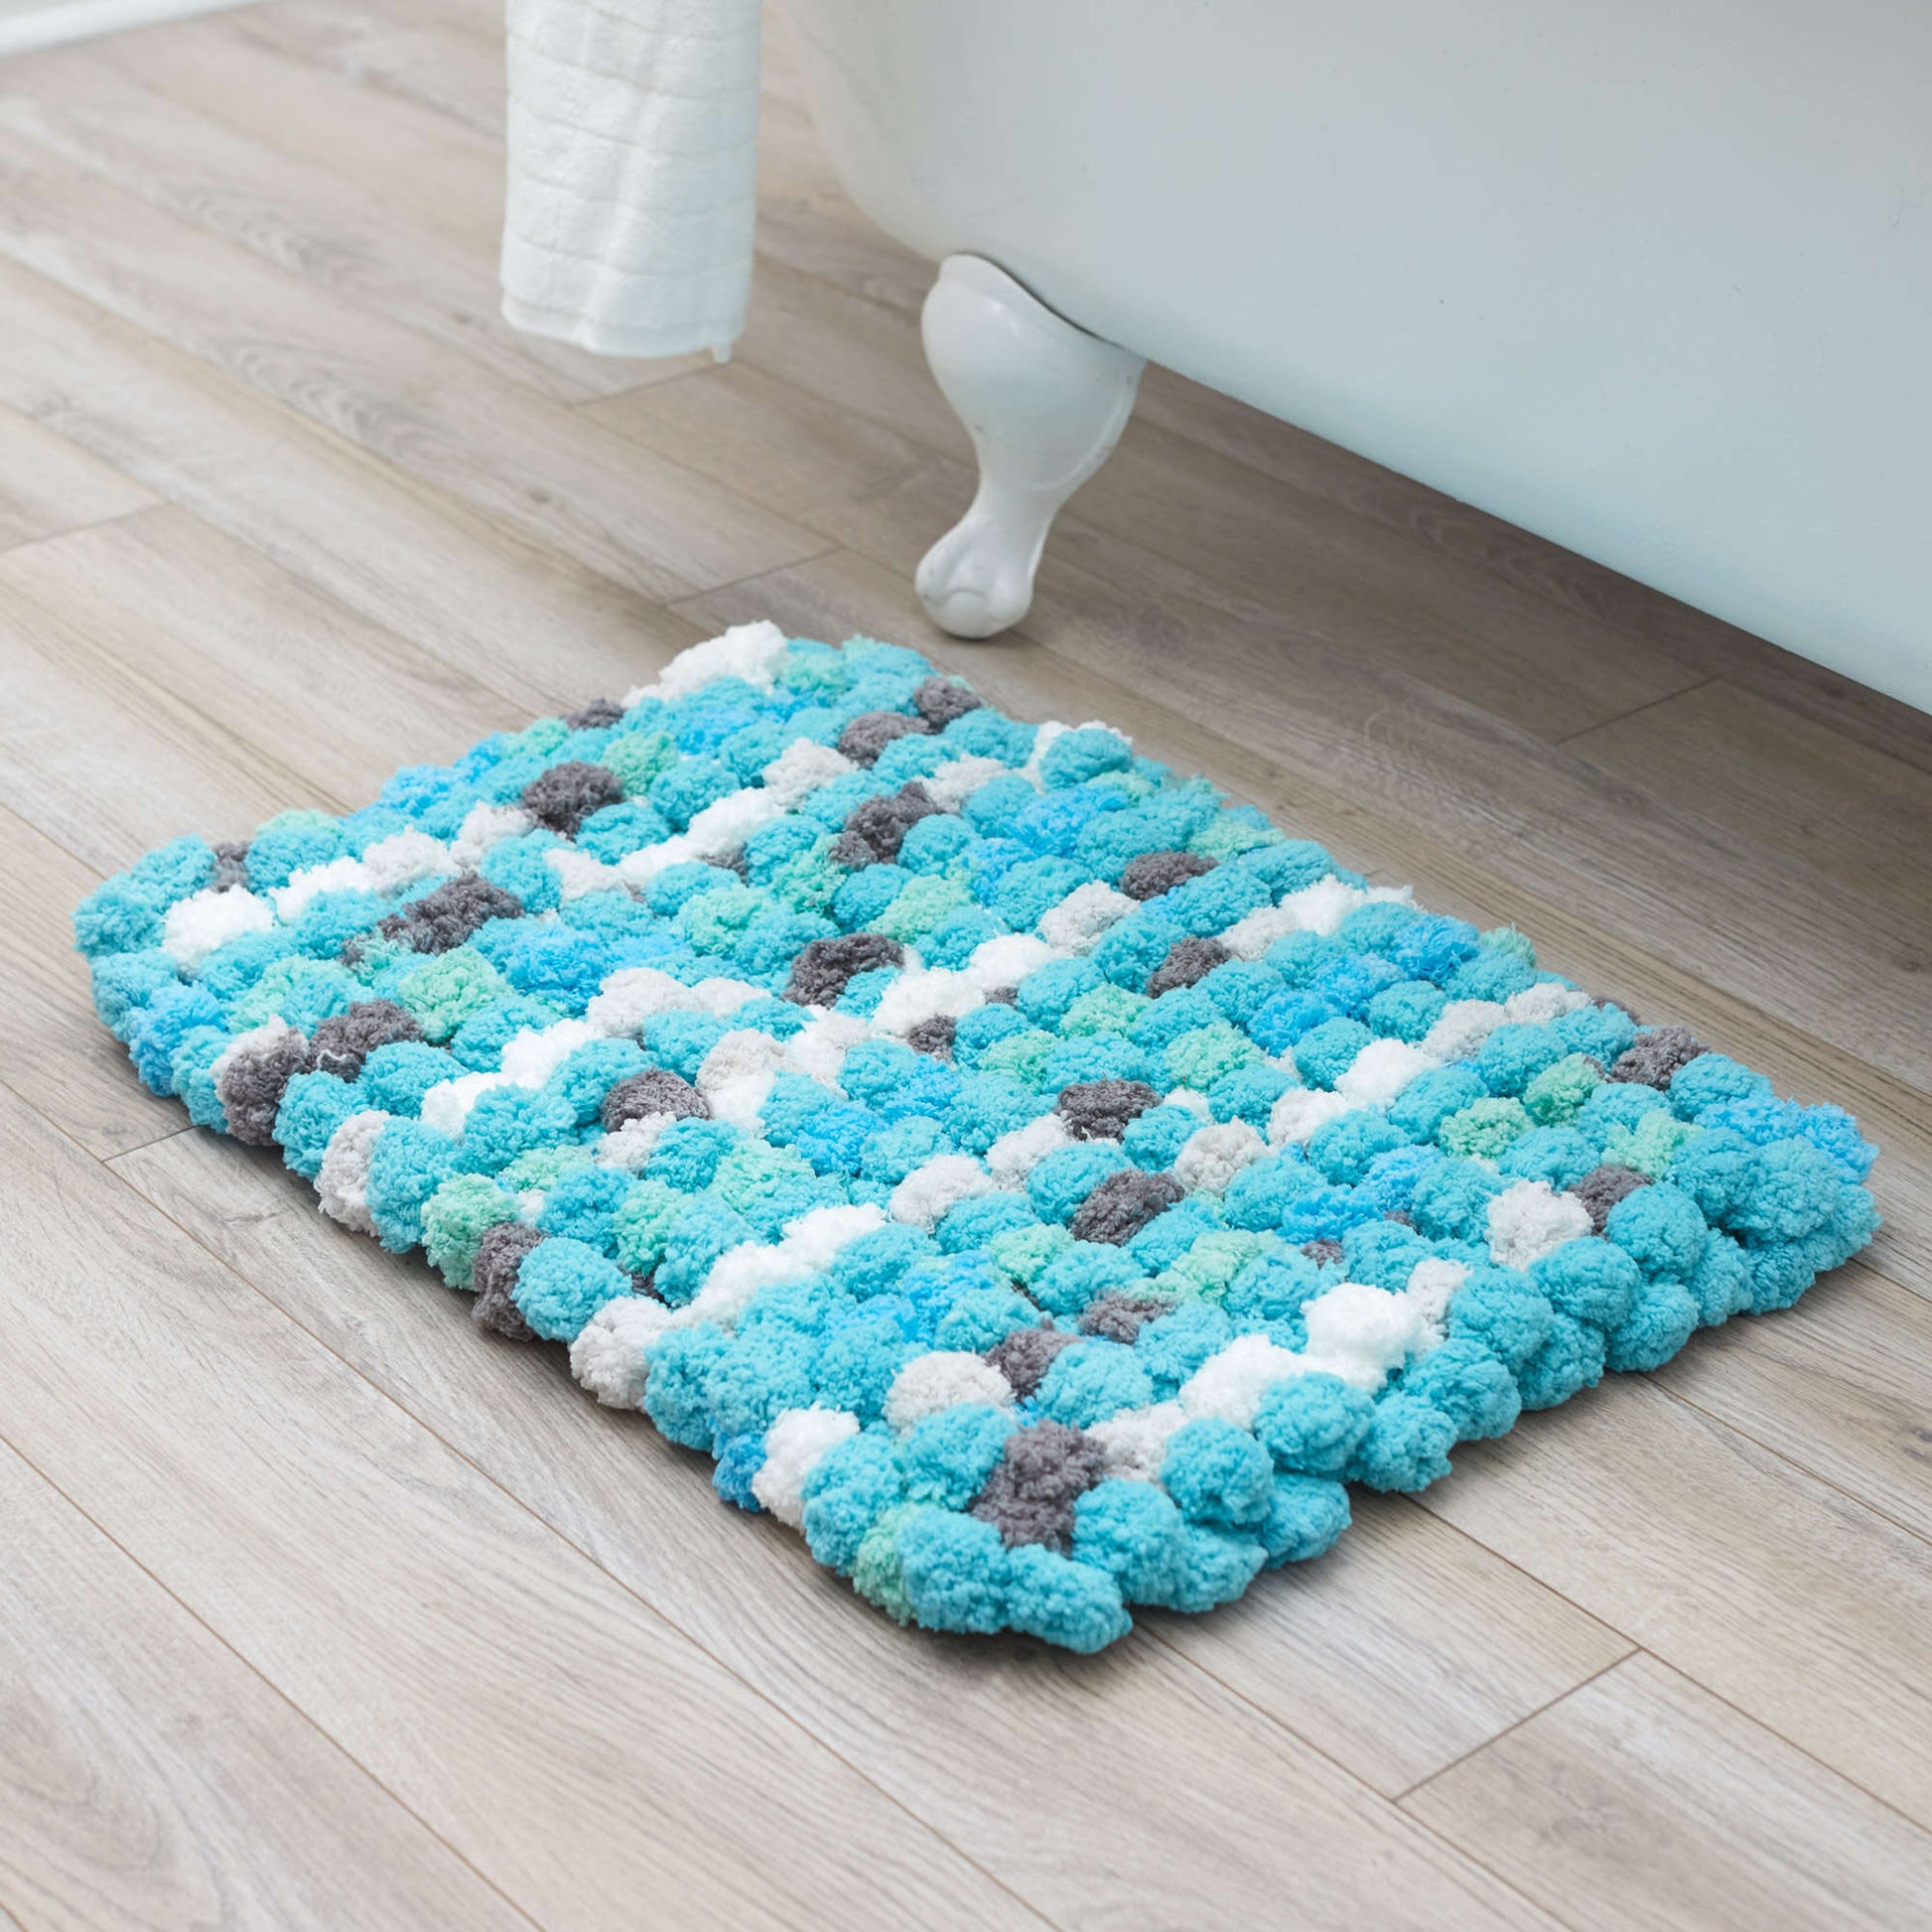 Free Red Heart Knit Luxurious Bath Rug Pattern